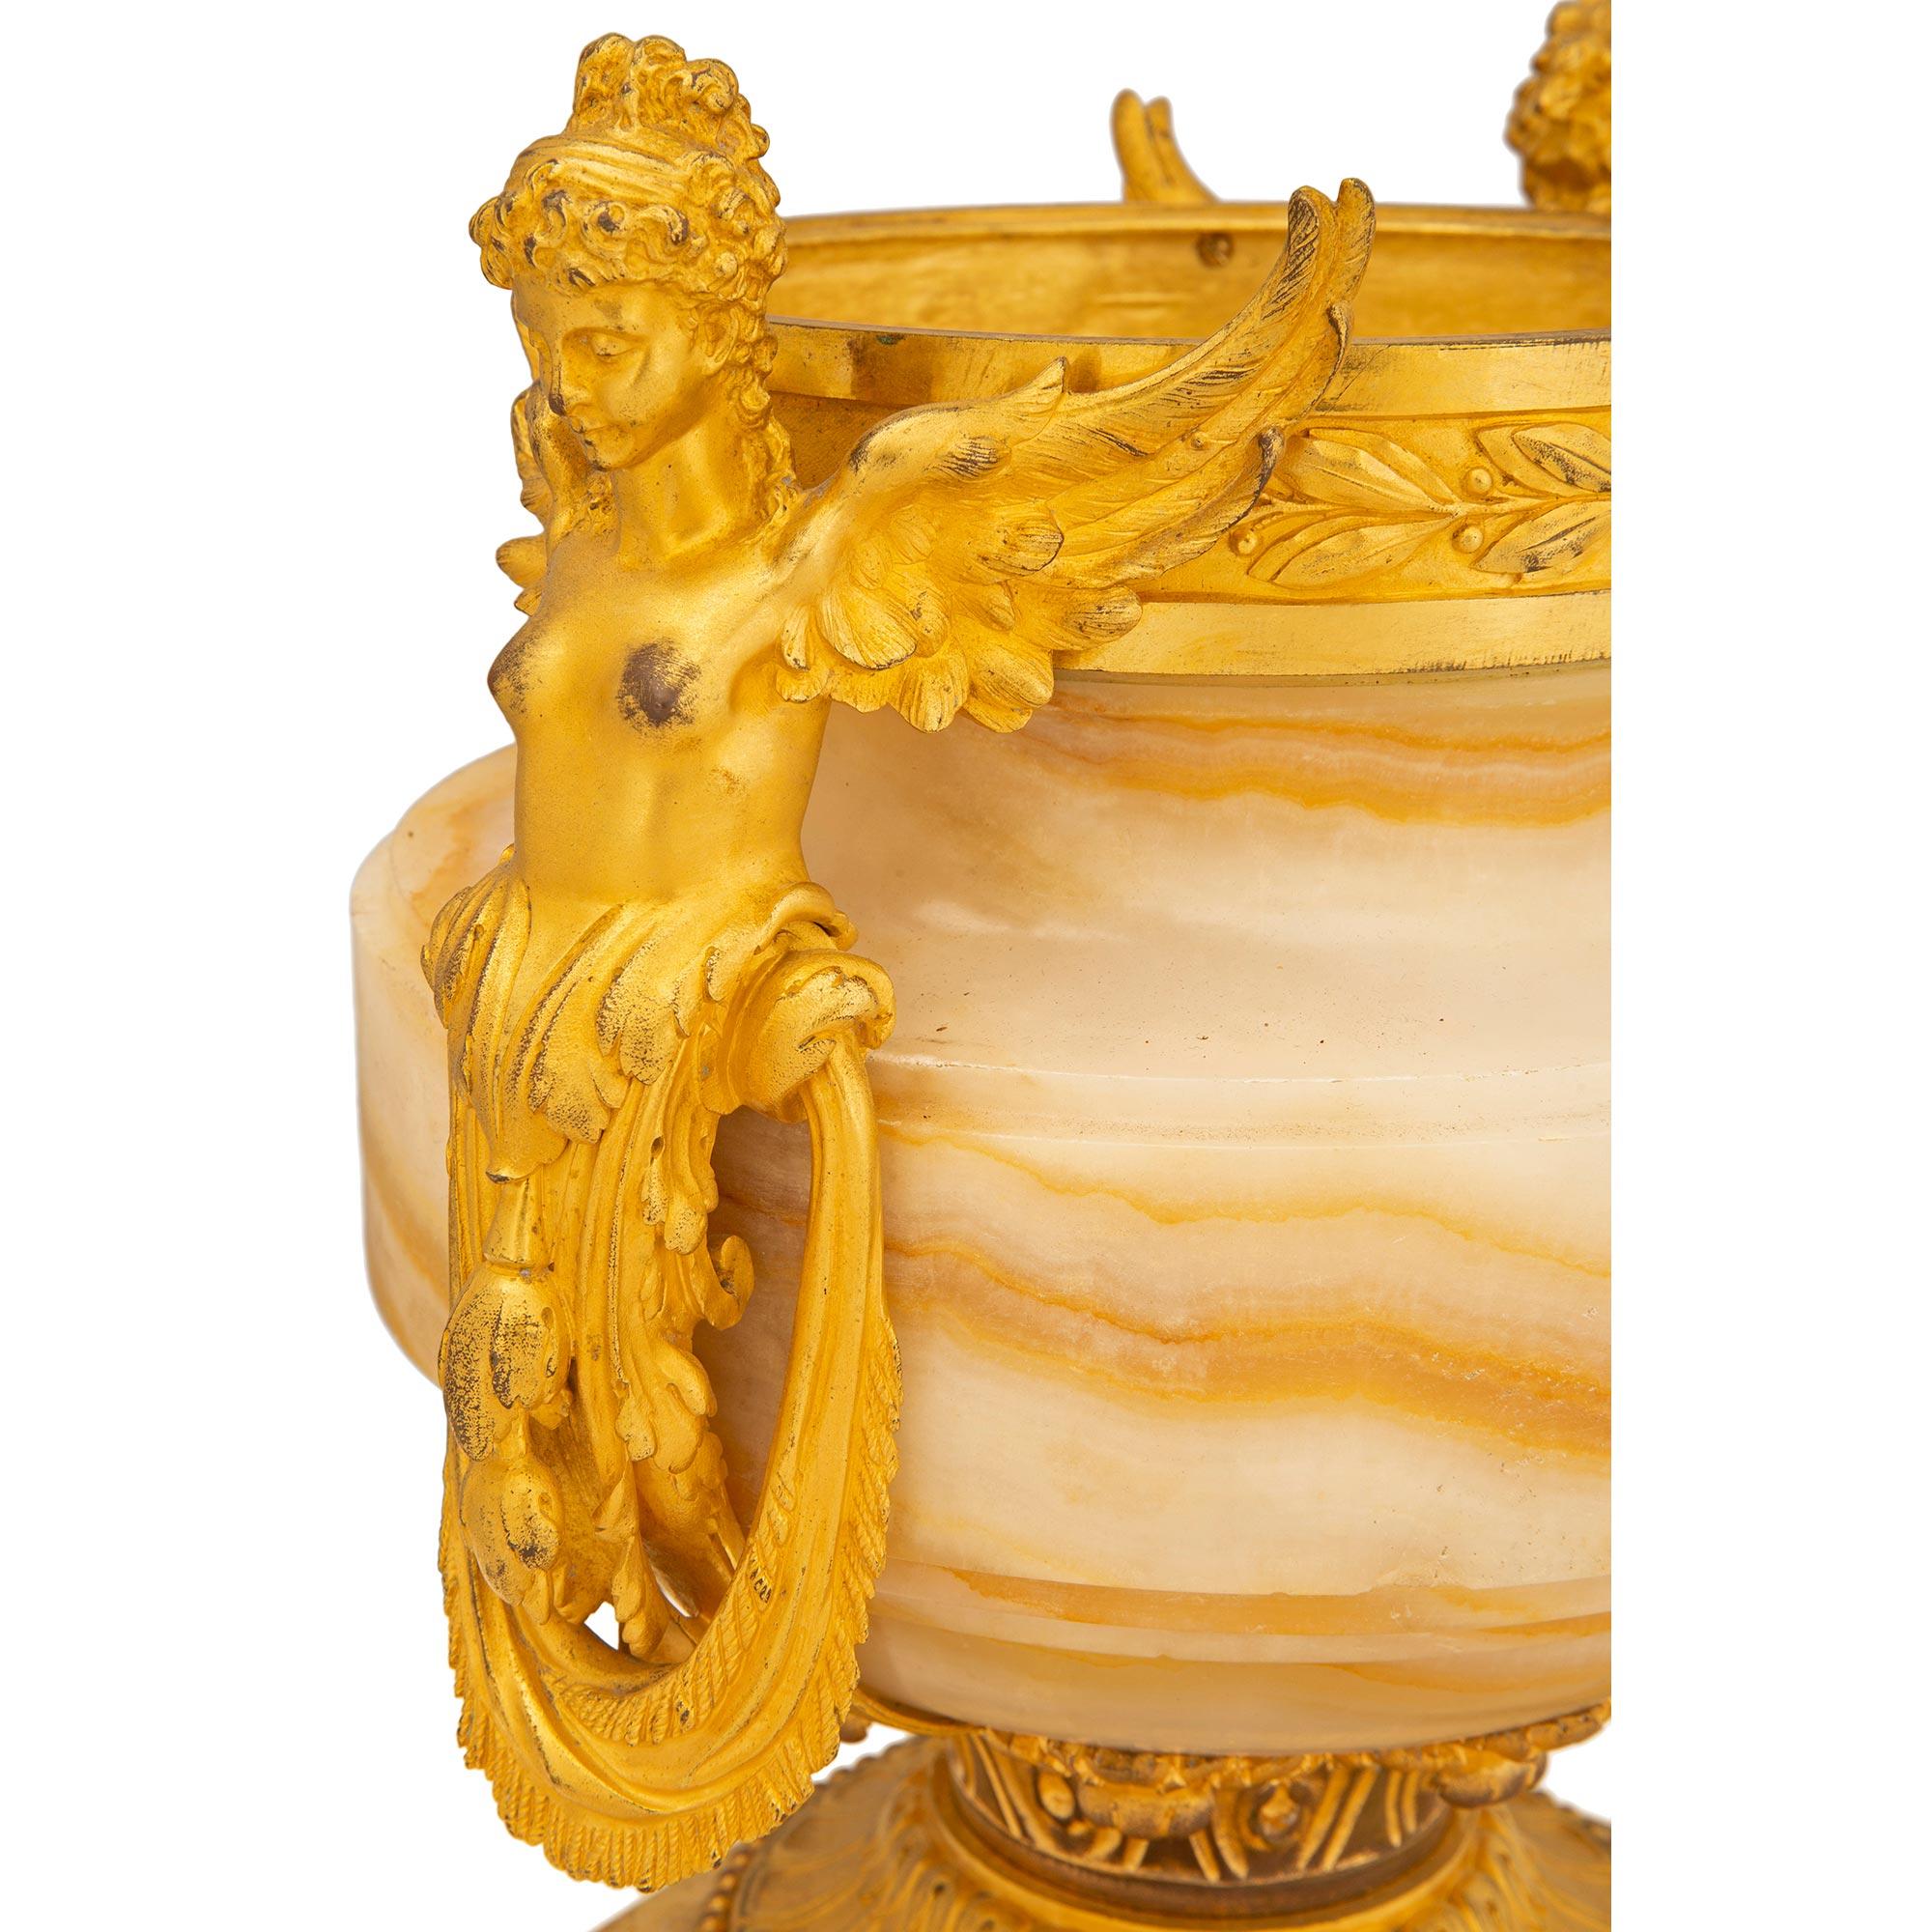 French 19th Century Louis XVI St. Belle Époque Period Onyx and Ormolu Urn For Sale 3